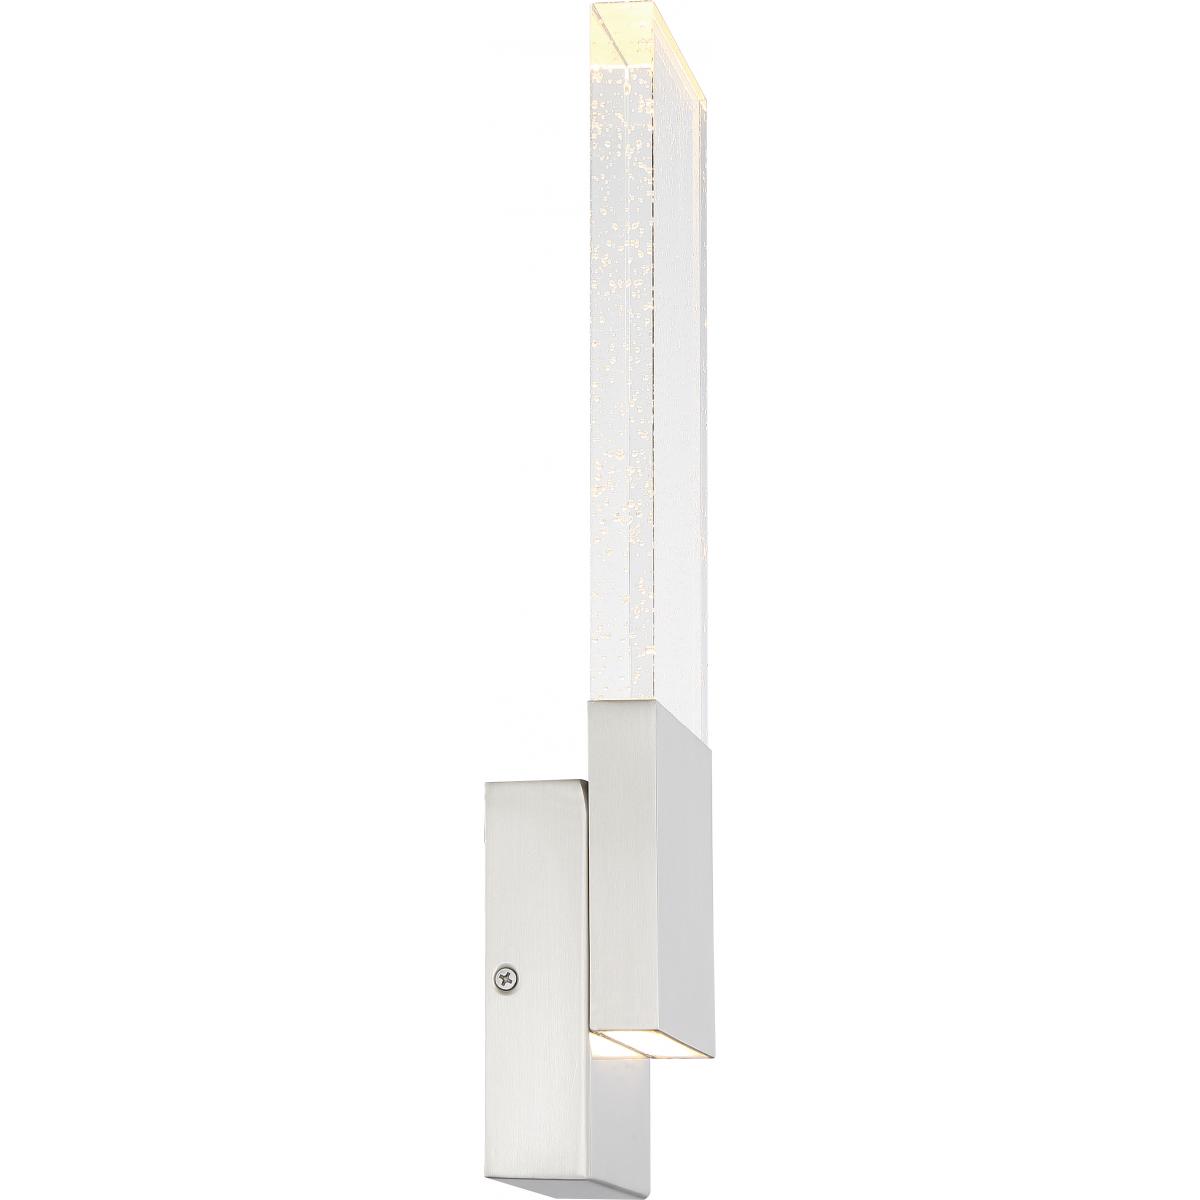 62-1503 ELLUSION LED LARGE WALL SCONCE